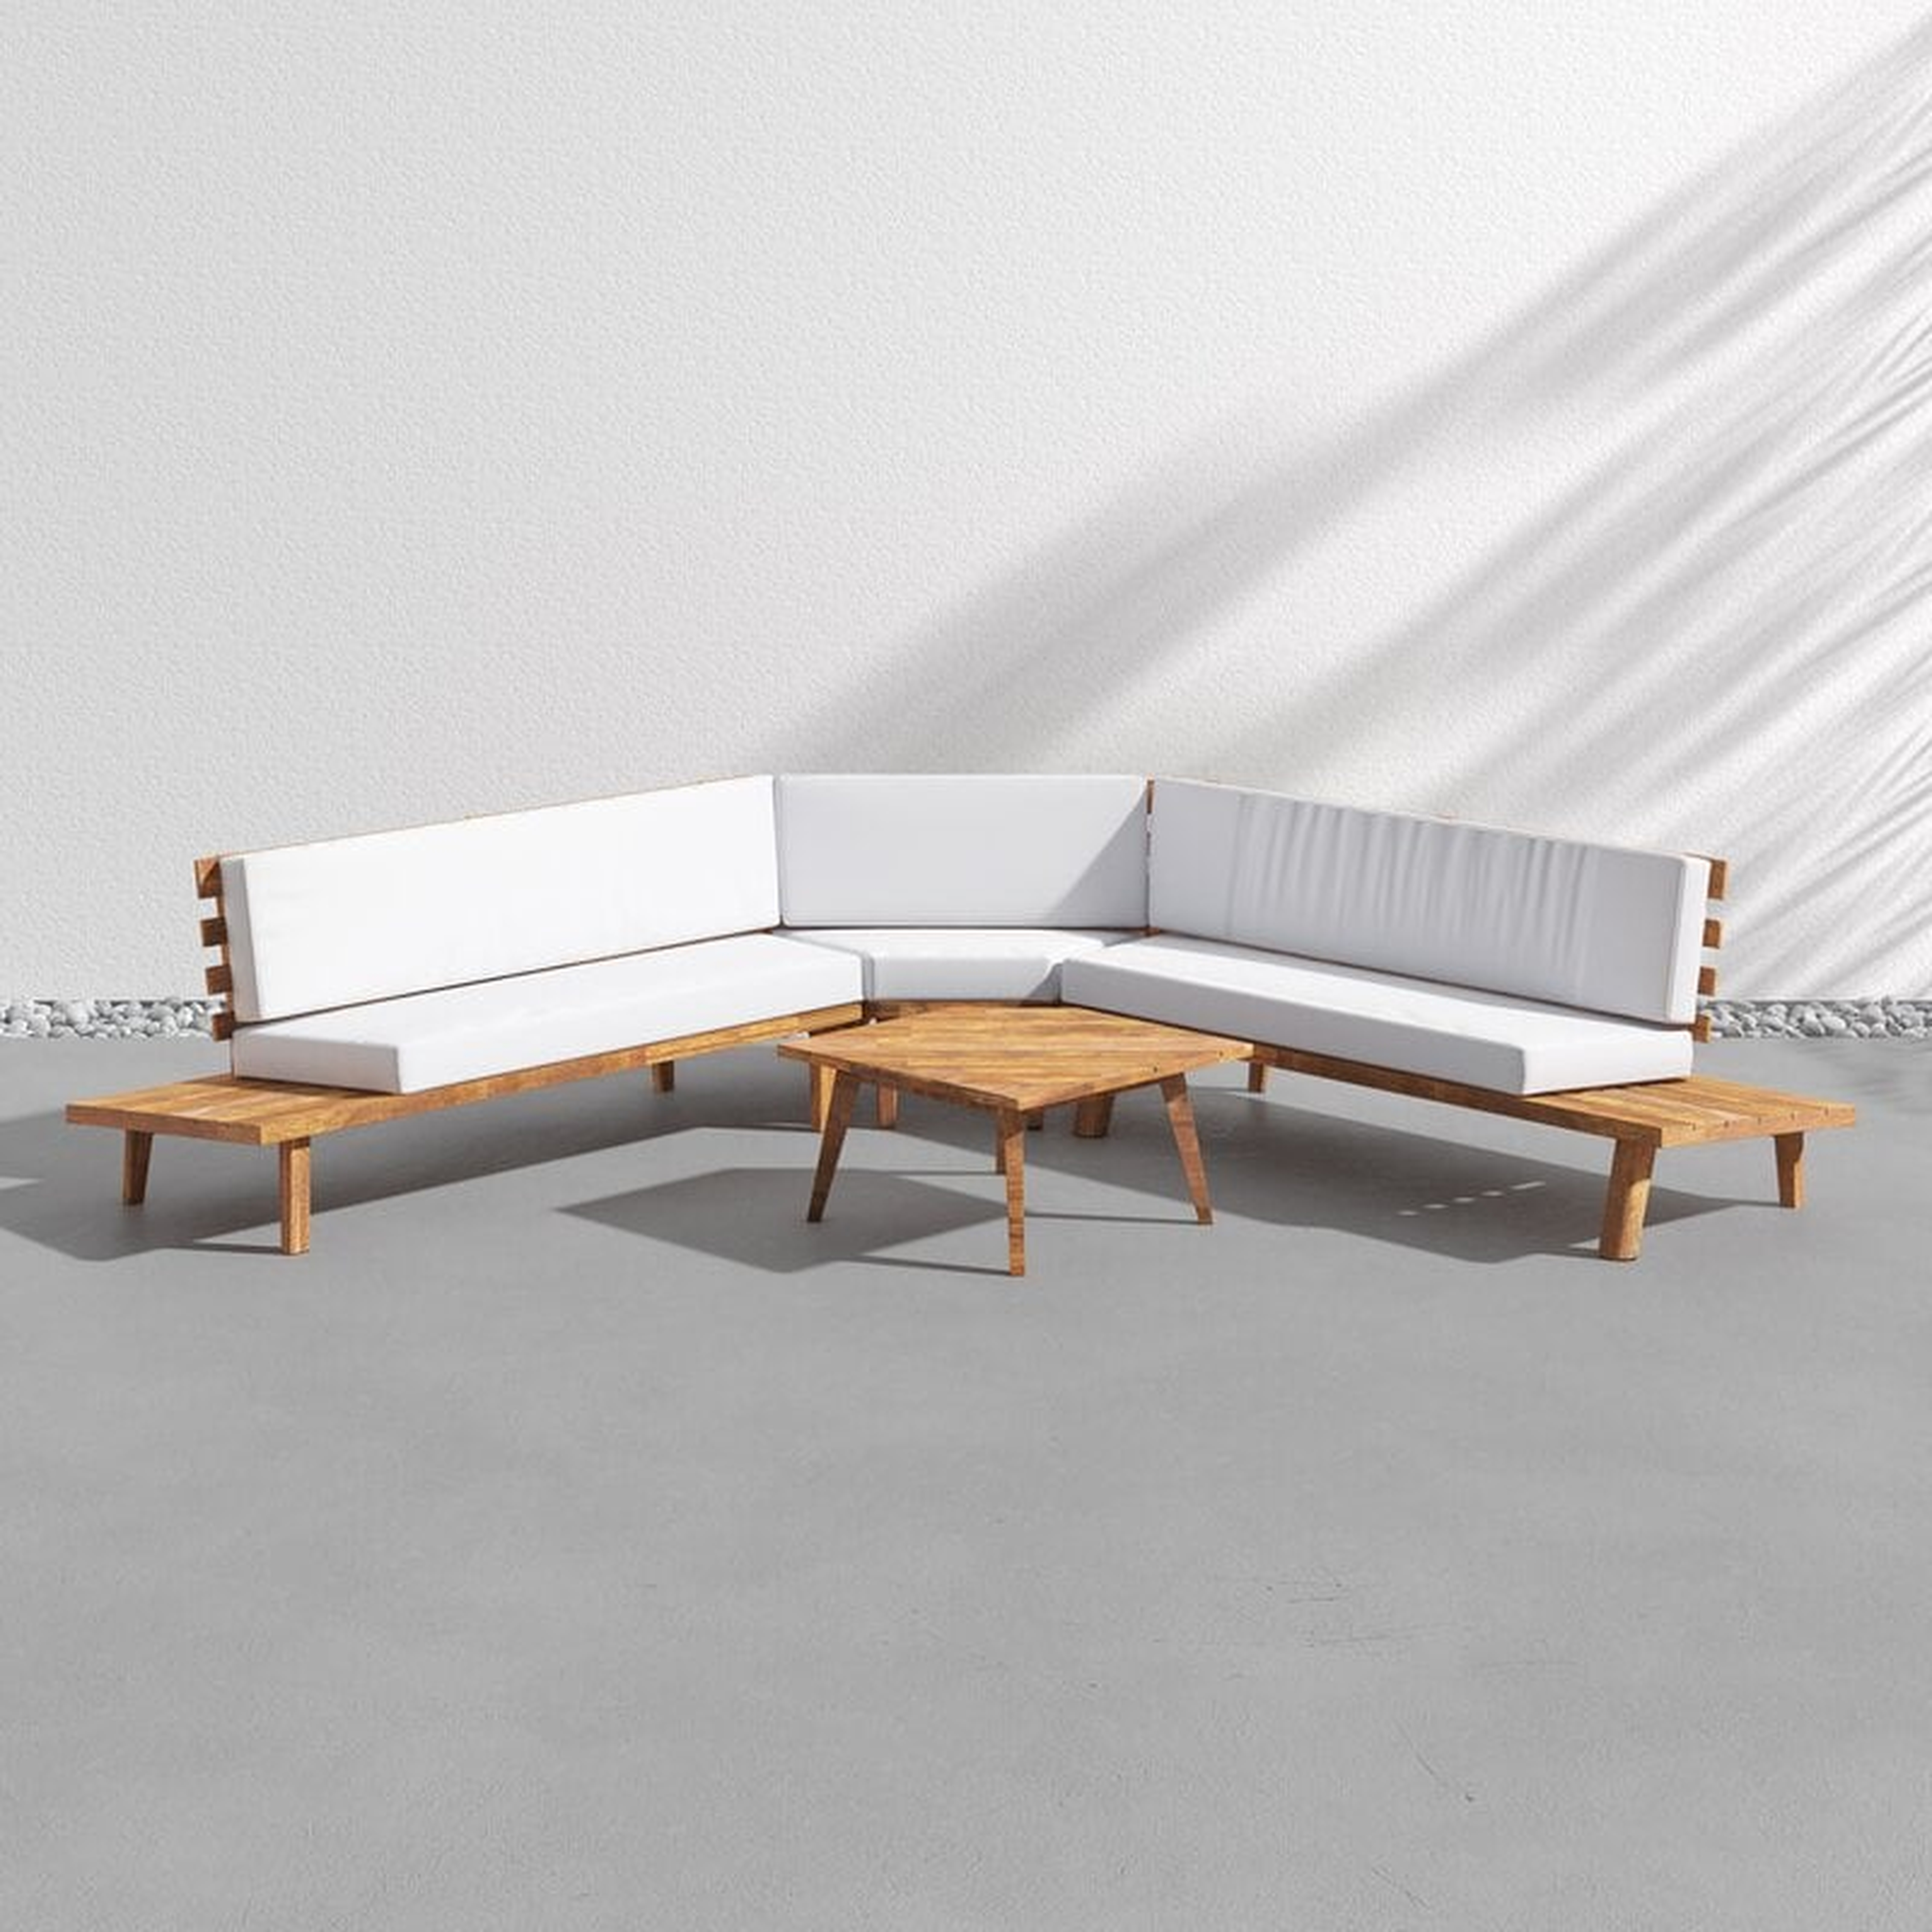 Calloway 4 Piece Sectional Seating Group with Cushions - AllModern